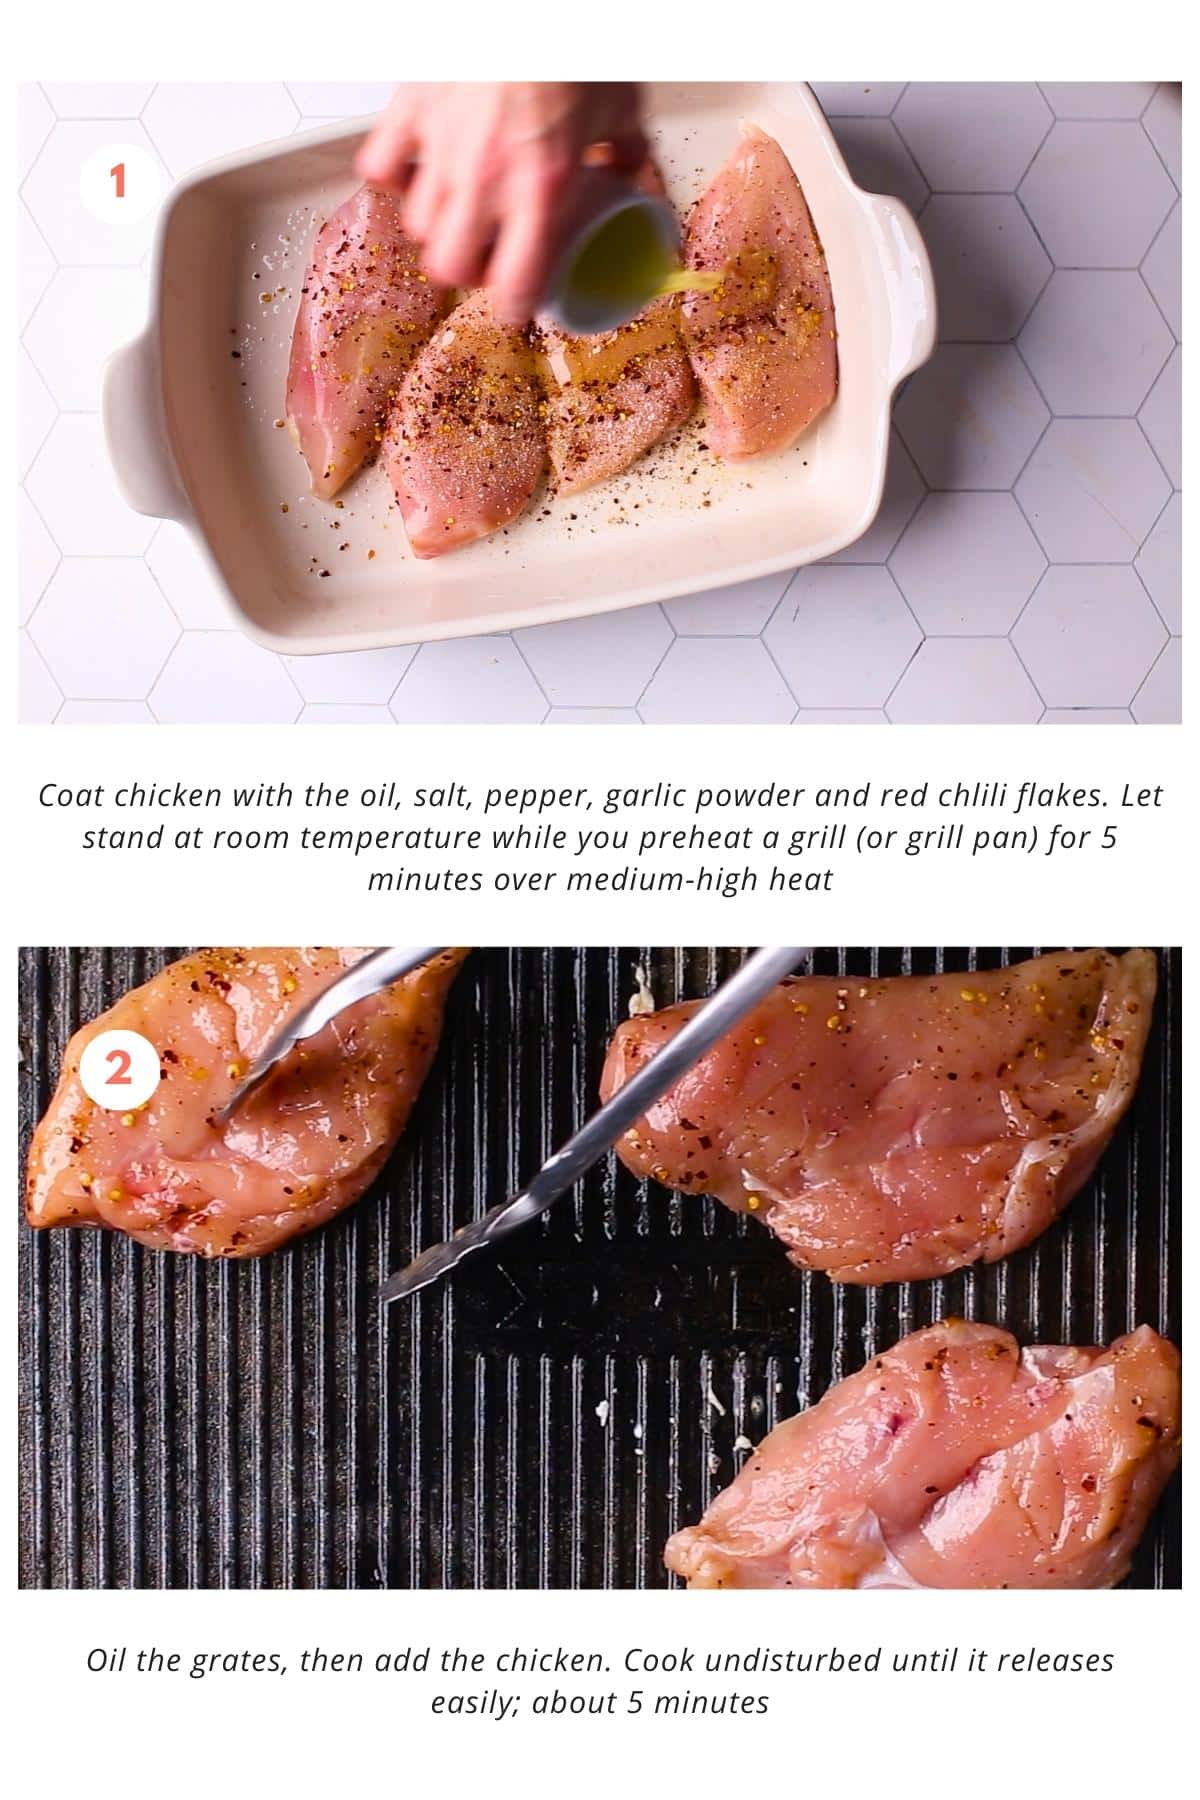 Raw chicken breasts seasoned with oil, salt, pepper, garlic powder, and red chili flakes placed on a plate. A grill pan is heated over medium-high heat, and the chicken is added and cooked undisturbed until it releases easily; about 5 minutes. 